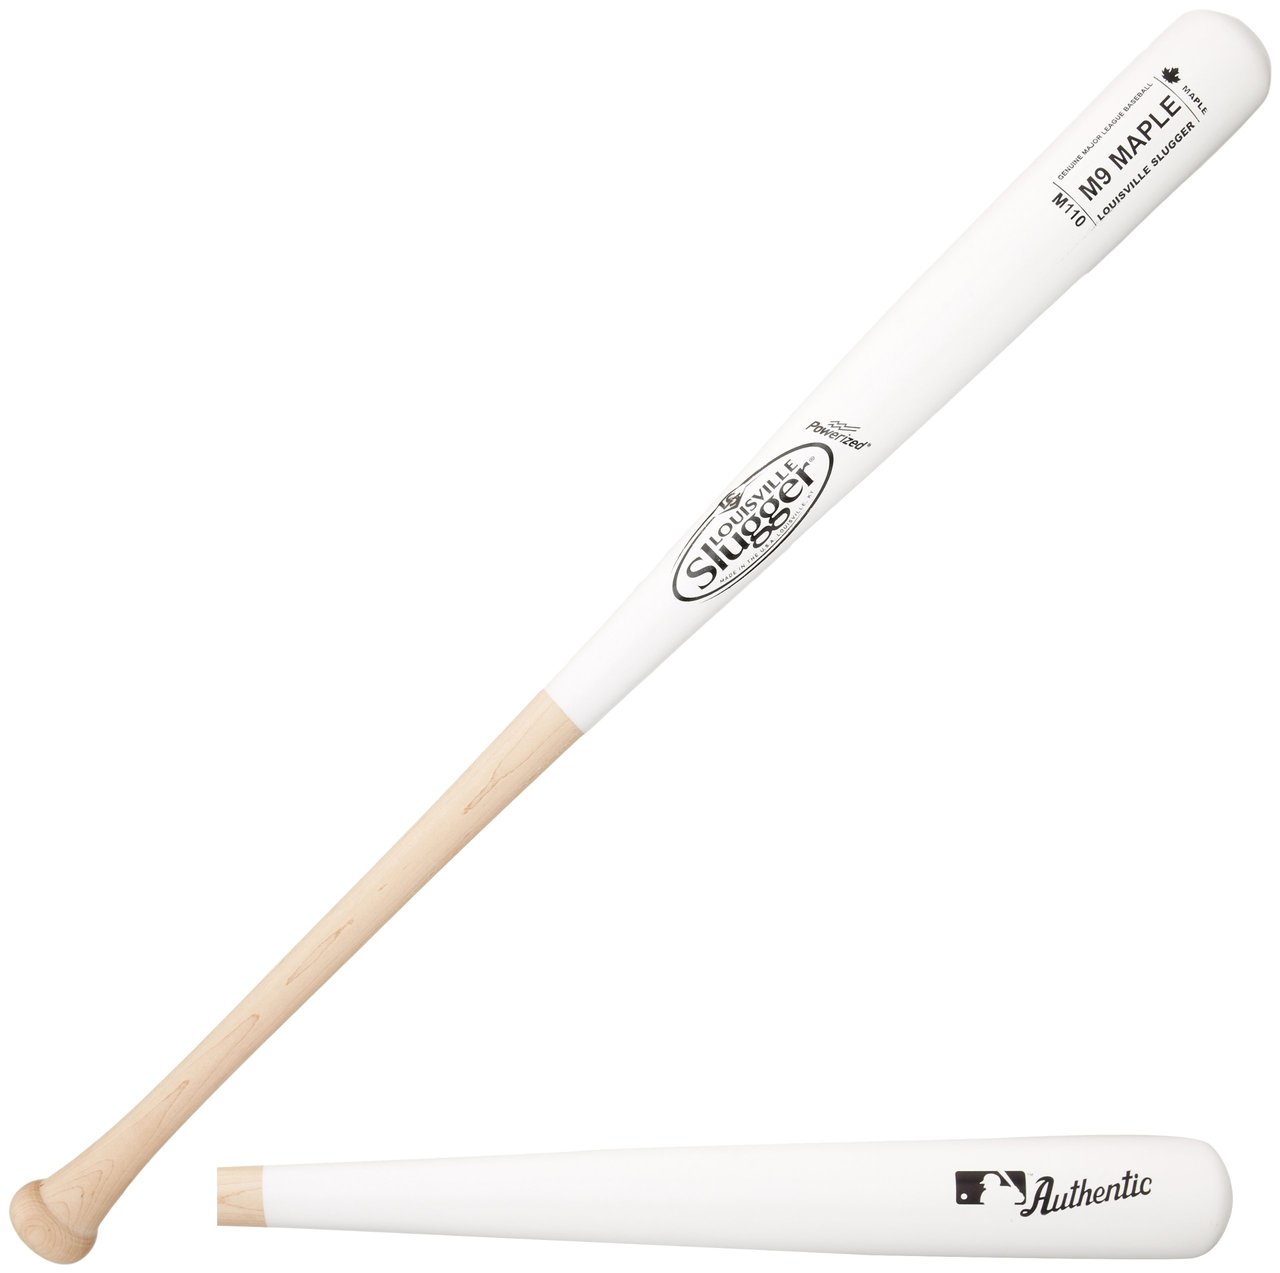 Louisville Slugger M9 Maple Bat. Louisville Slugger WBM914-10CNW M110 M9 Maple Wood Bat has a harder hitting surface than ash, which may give you better performance. It is a closed-grain timber that is less prone to flaking than ash, and therefore more durable. Wood #1 Grade Maple. Finish Natural Handle White Barrel. Handle 1 inch. Barrel Medium. Turning Model M110. Cupped Yes.